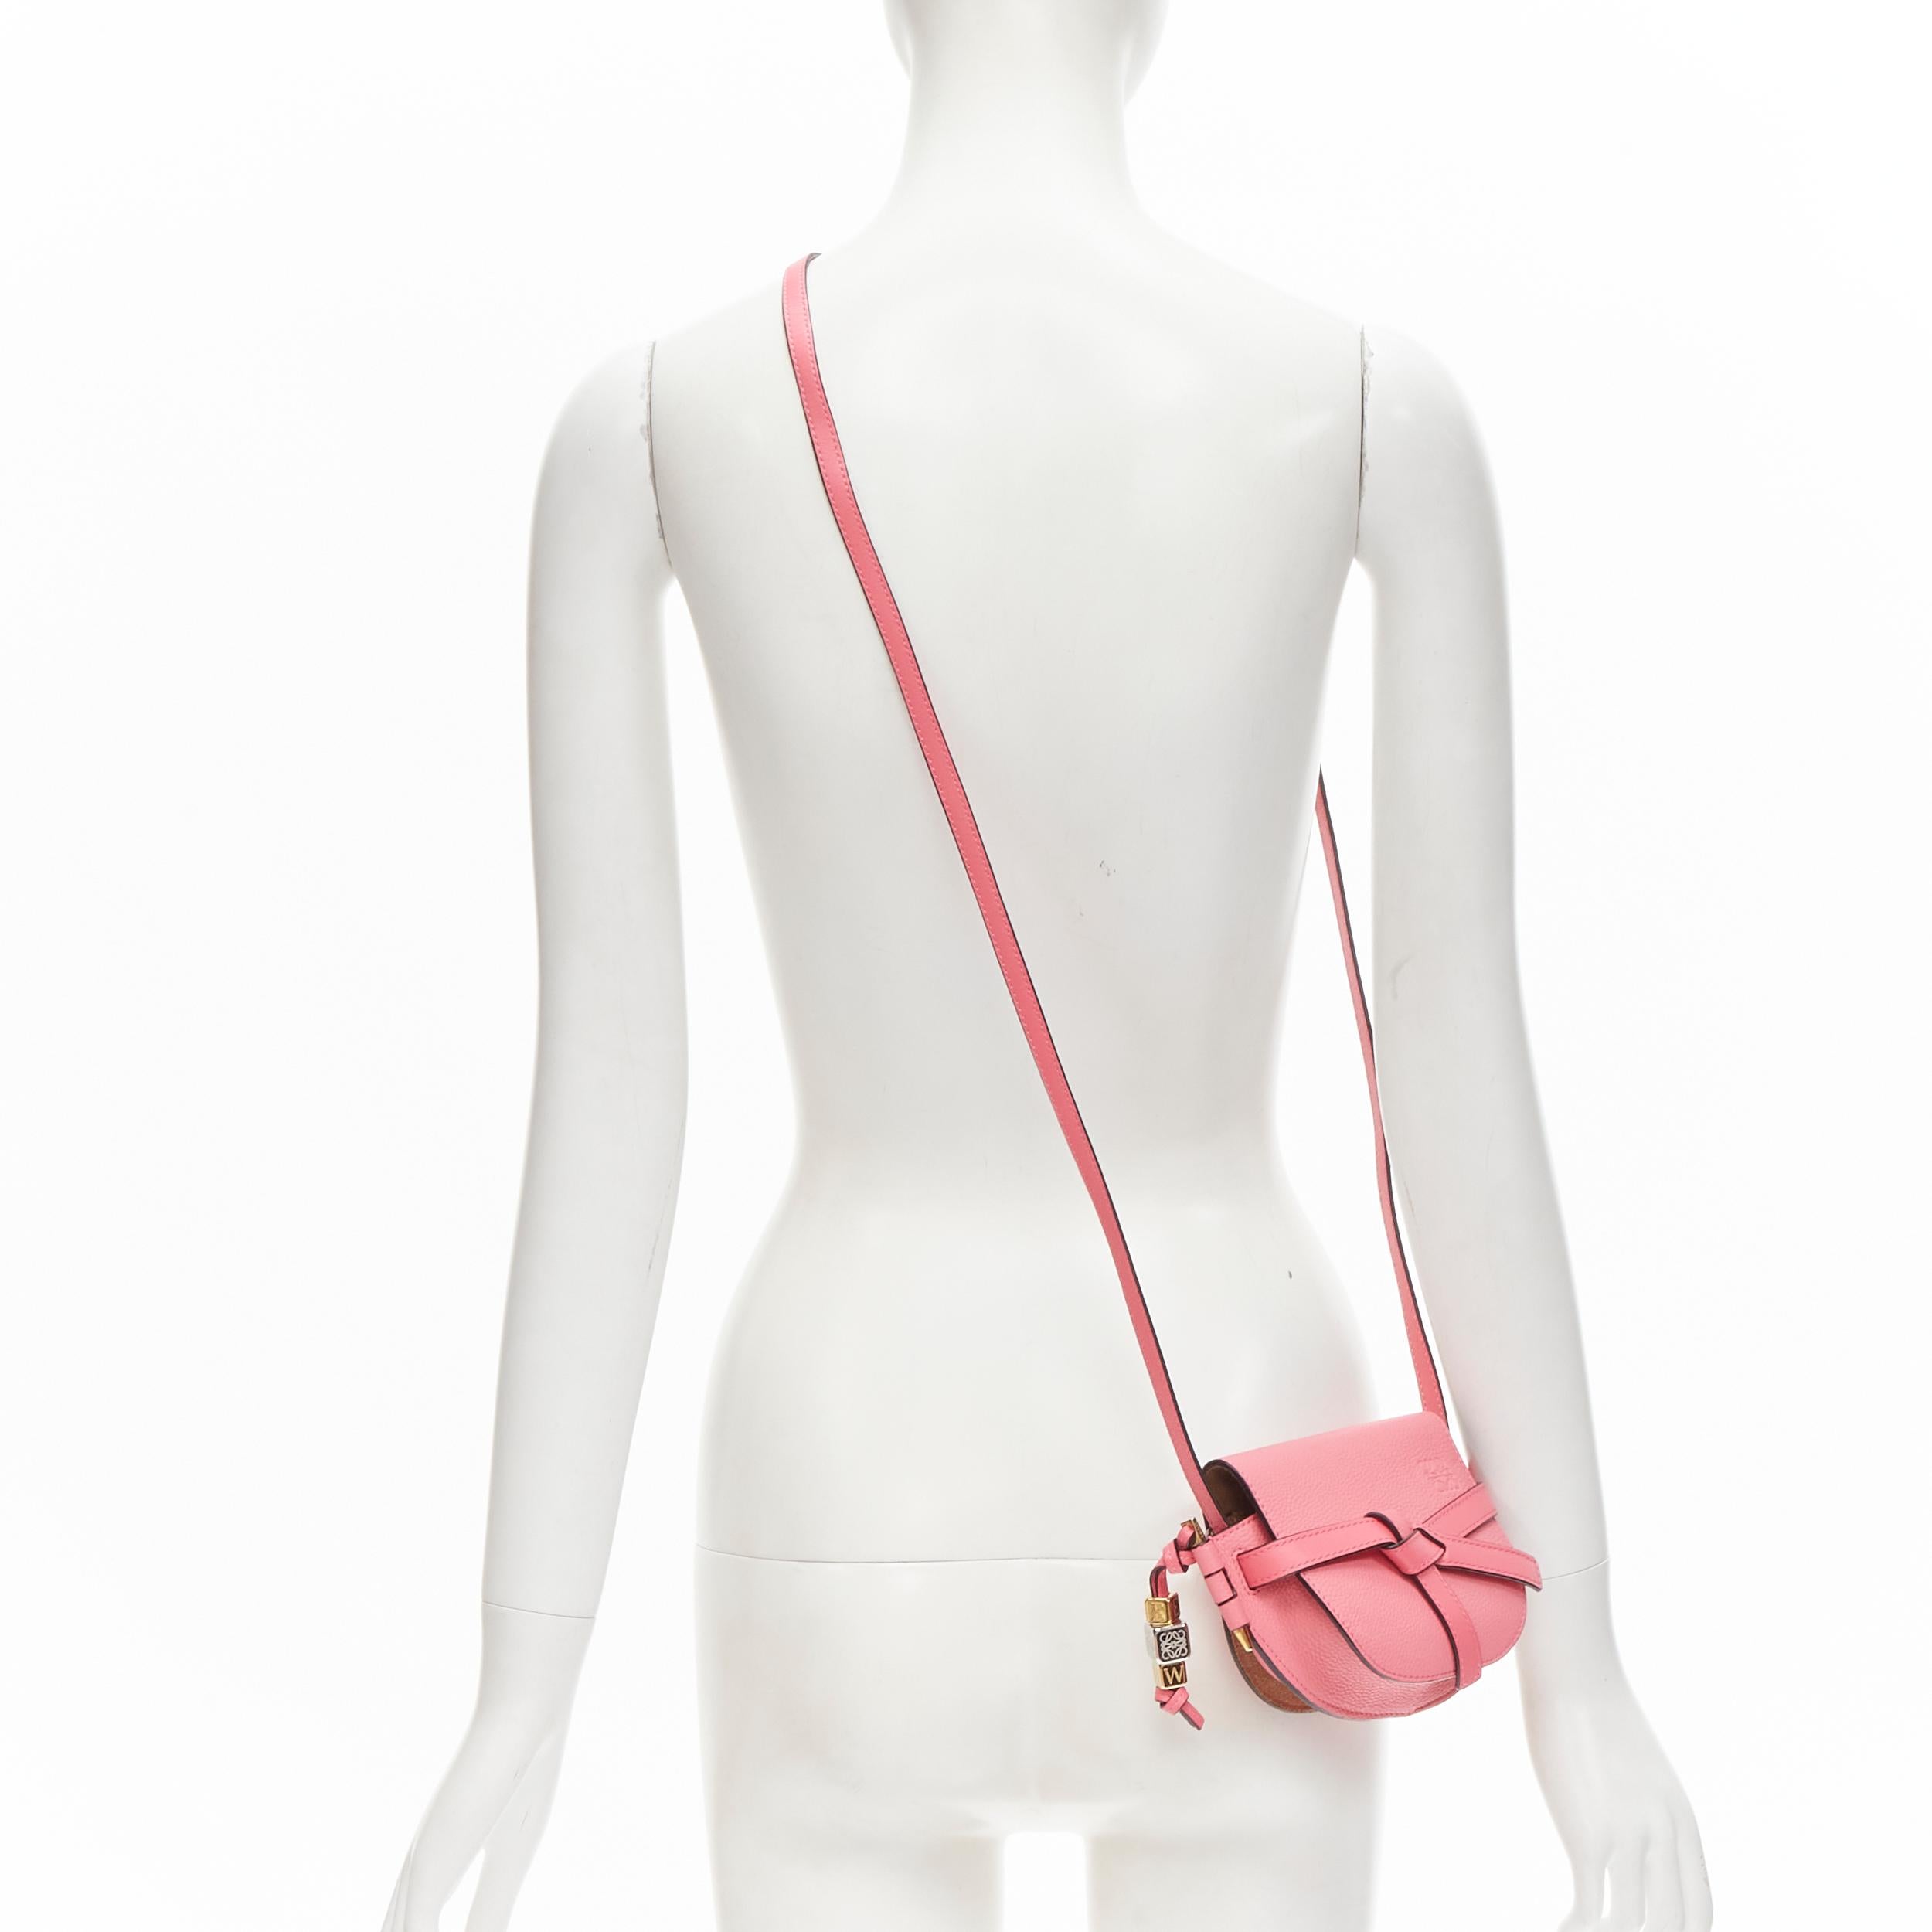 LOEWE Mini Gate light pink knot strap half moon crossbody bag 
Reference: ANWU/A00048 
Brand: Loewe 
Designer: JW Anderson 
Model: Mini Gate 
Material: Leather
Color: Pink 
Pattern: Solid 
Extra Detail: Pink leather with gold-tonehardware. LOEWE